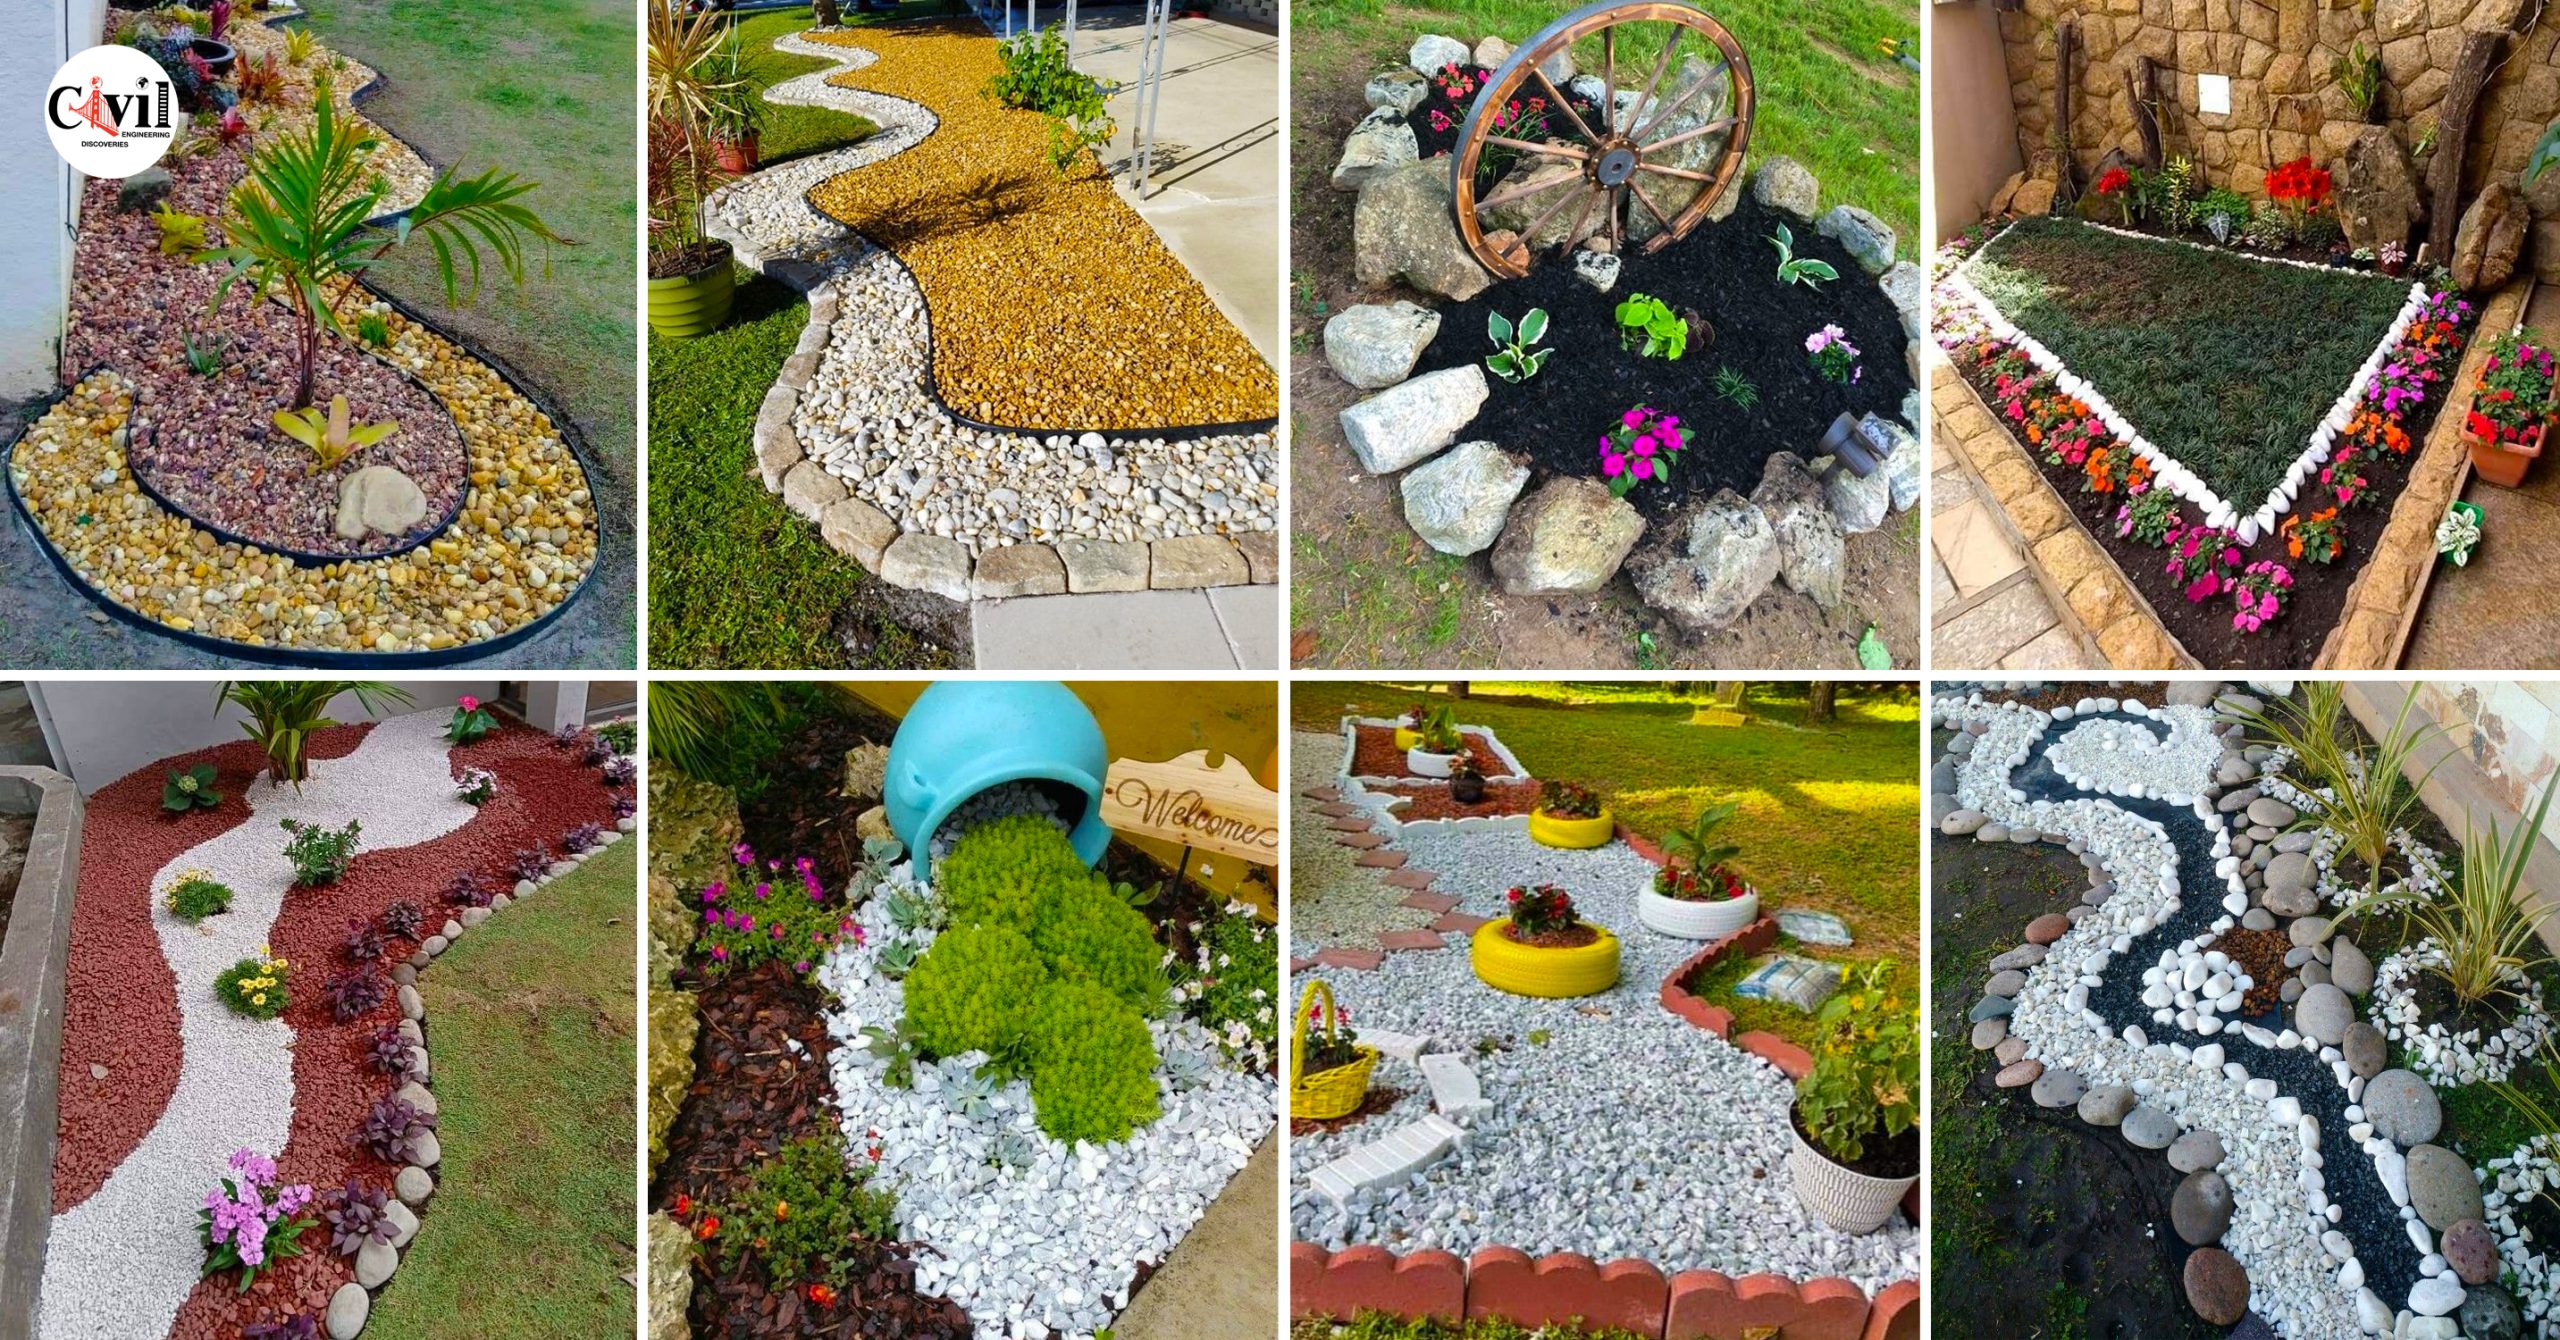 Inspiring Gardening Design Ideas To Try At Home scaled